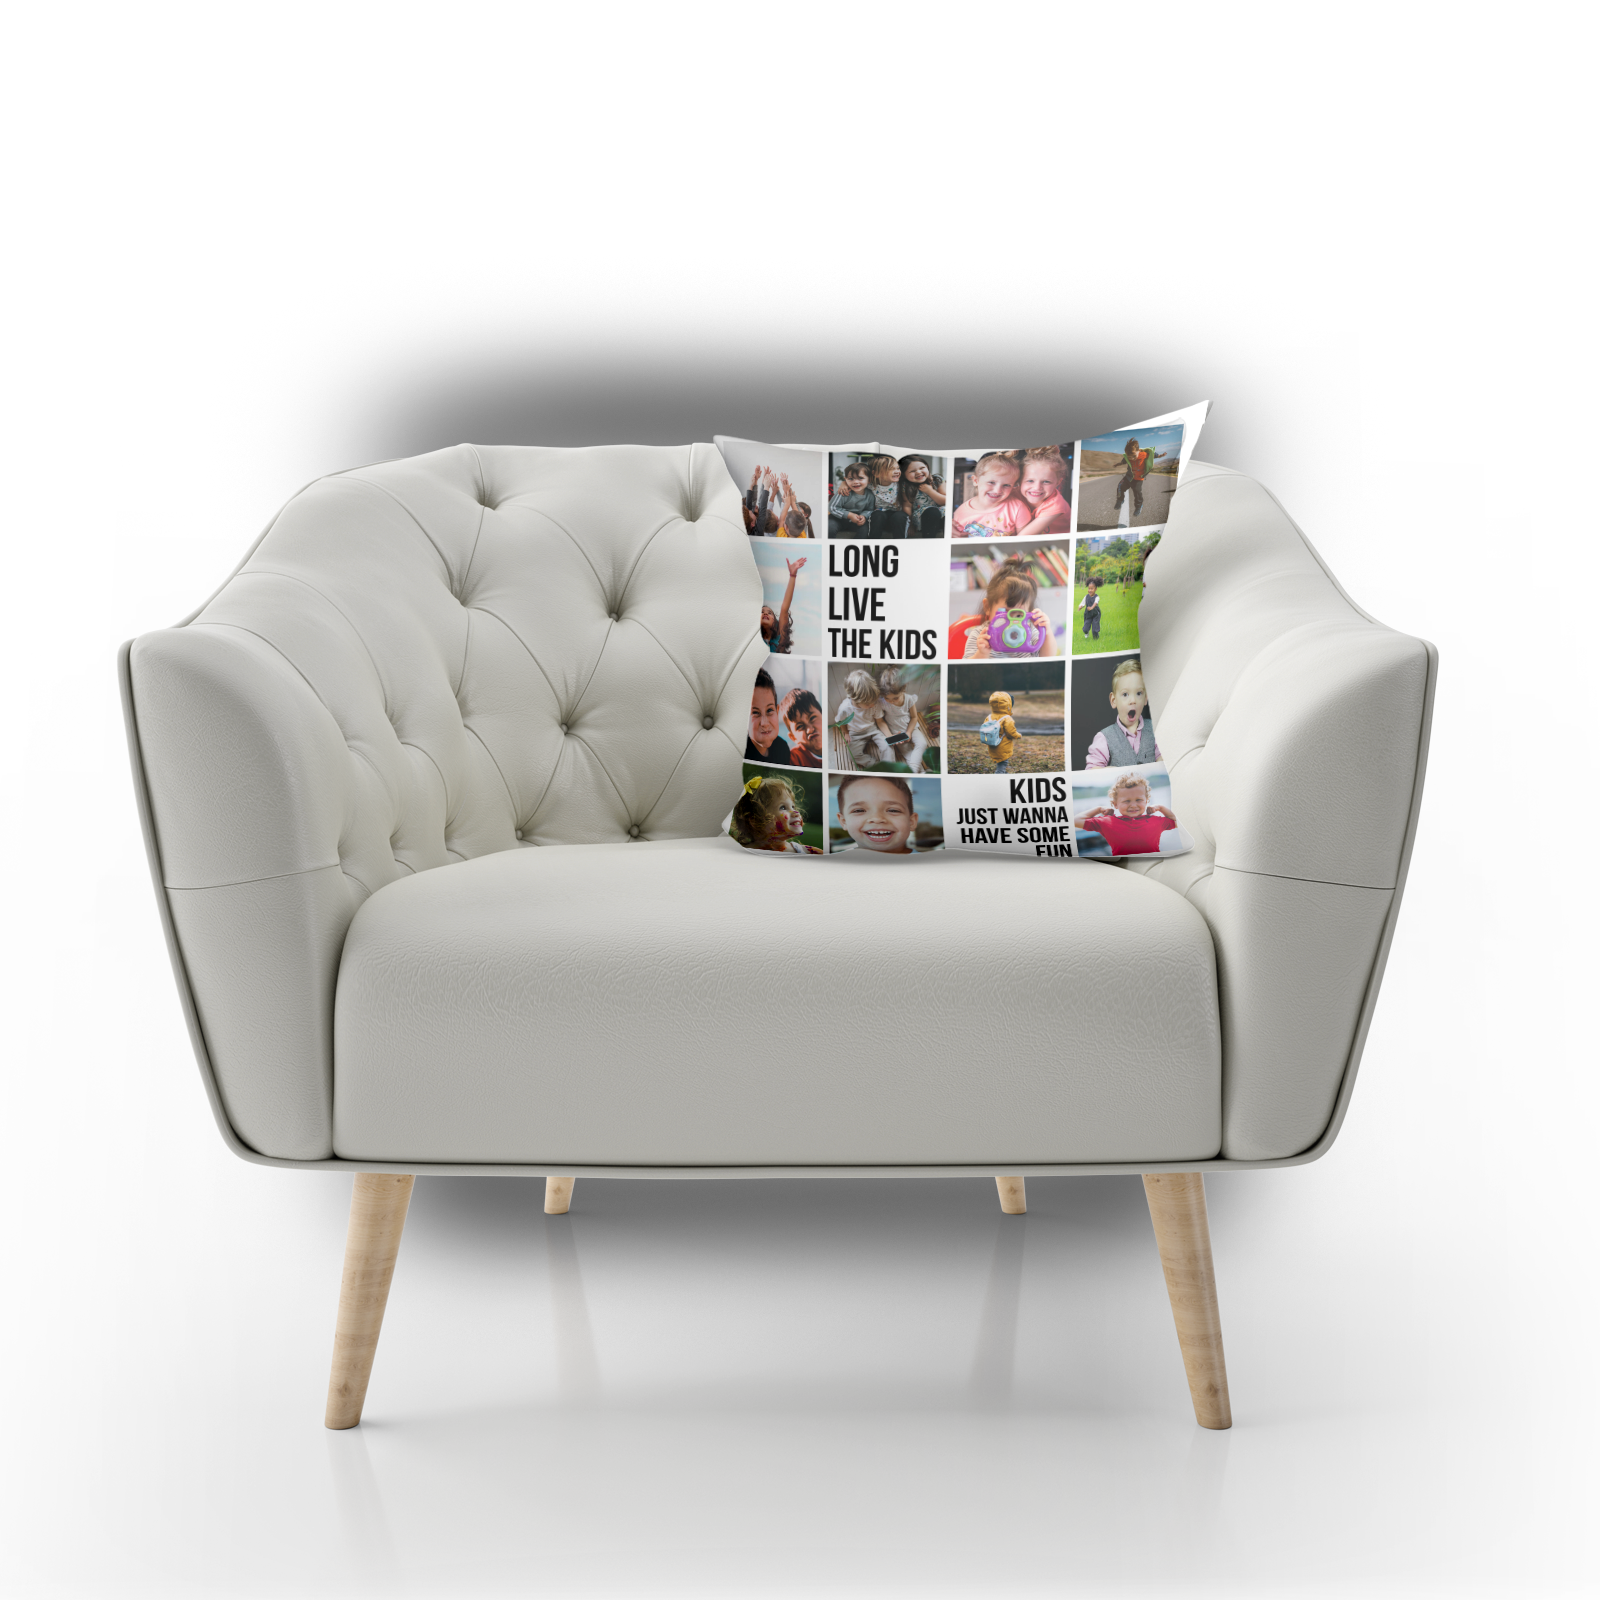 14 Image Gallery Photo Pillow